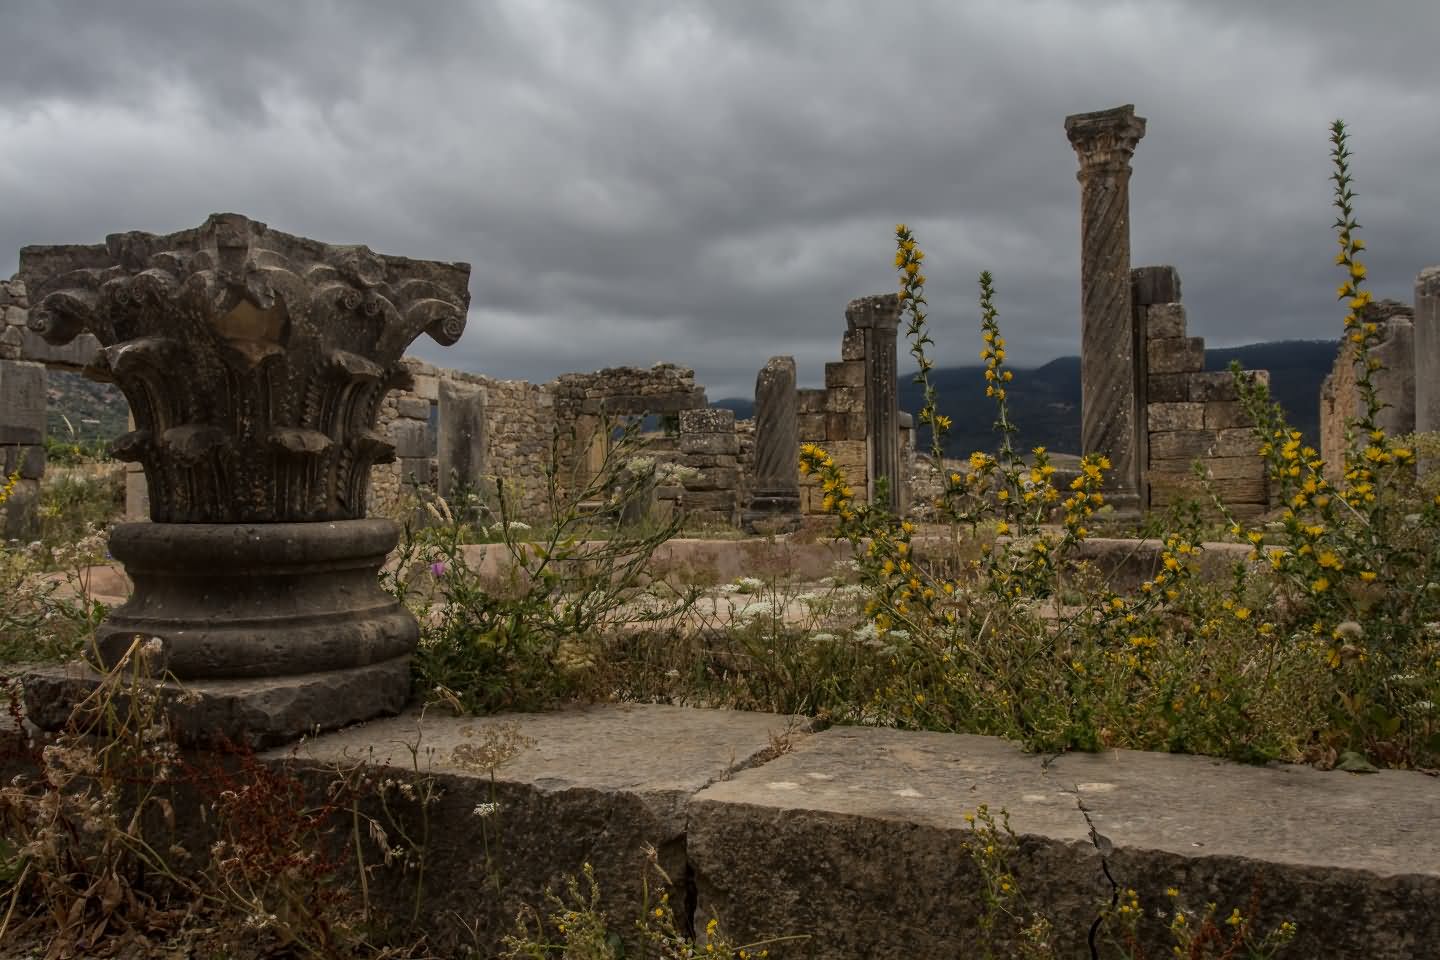 Gardens At the Ruins Of Volubilis